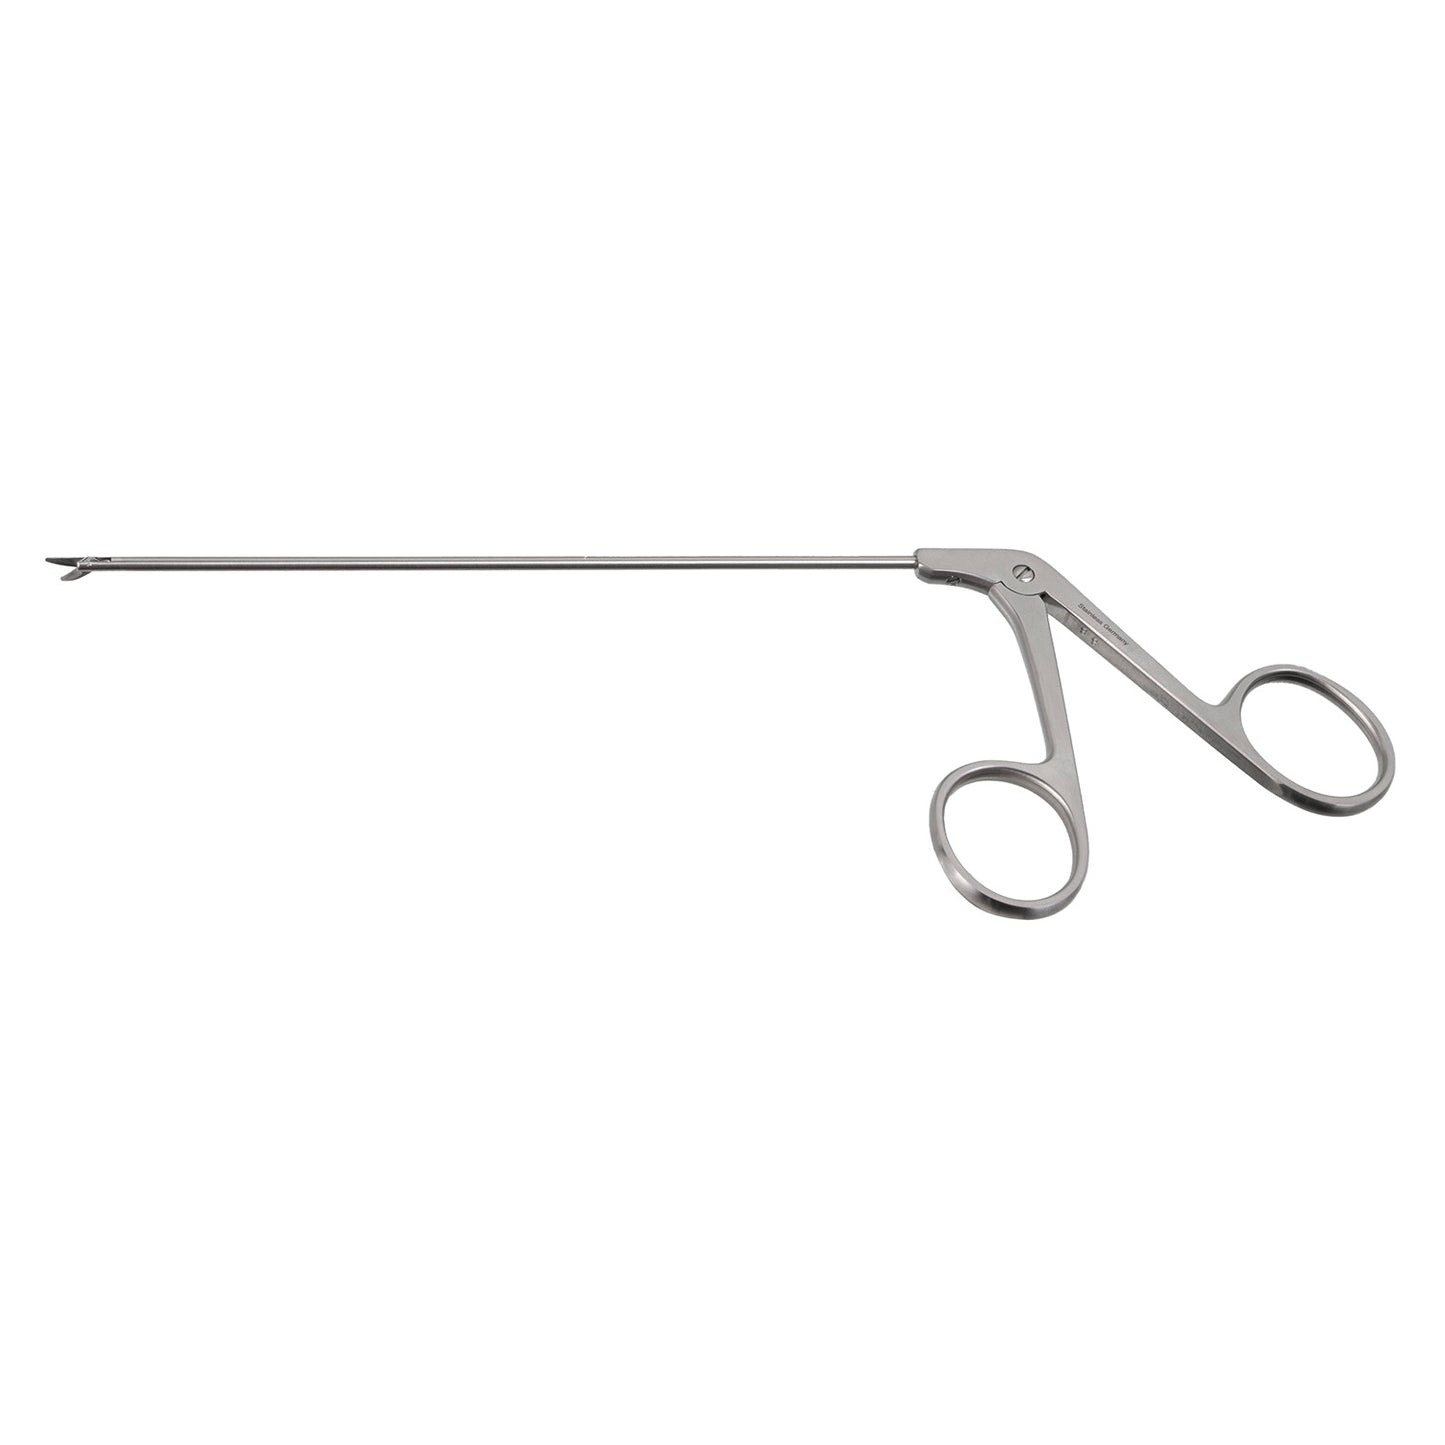 Access Curved Scissors, shaft; overall